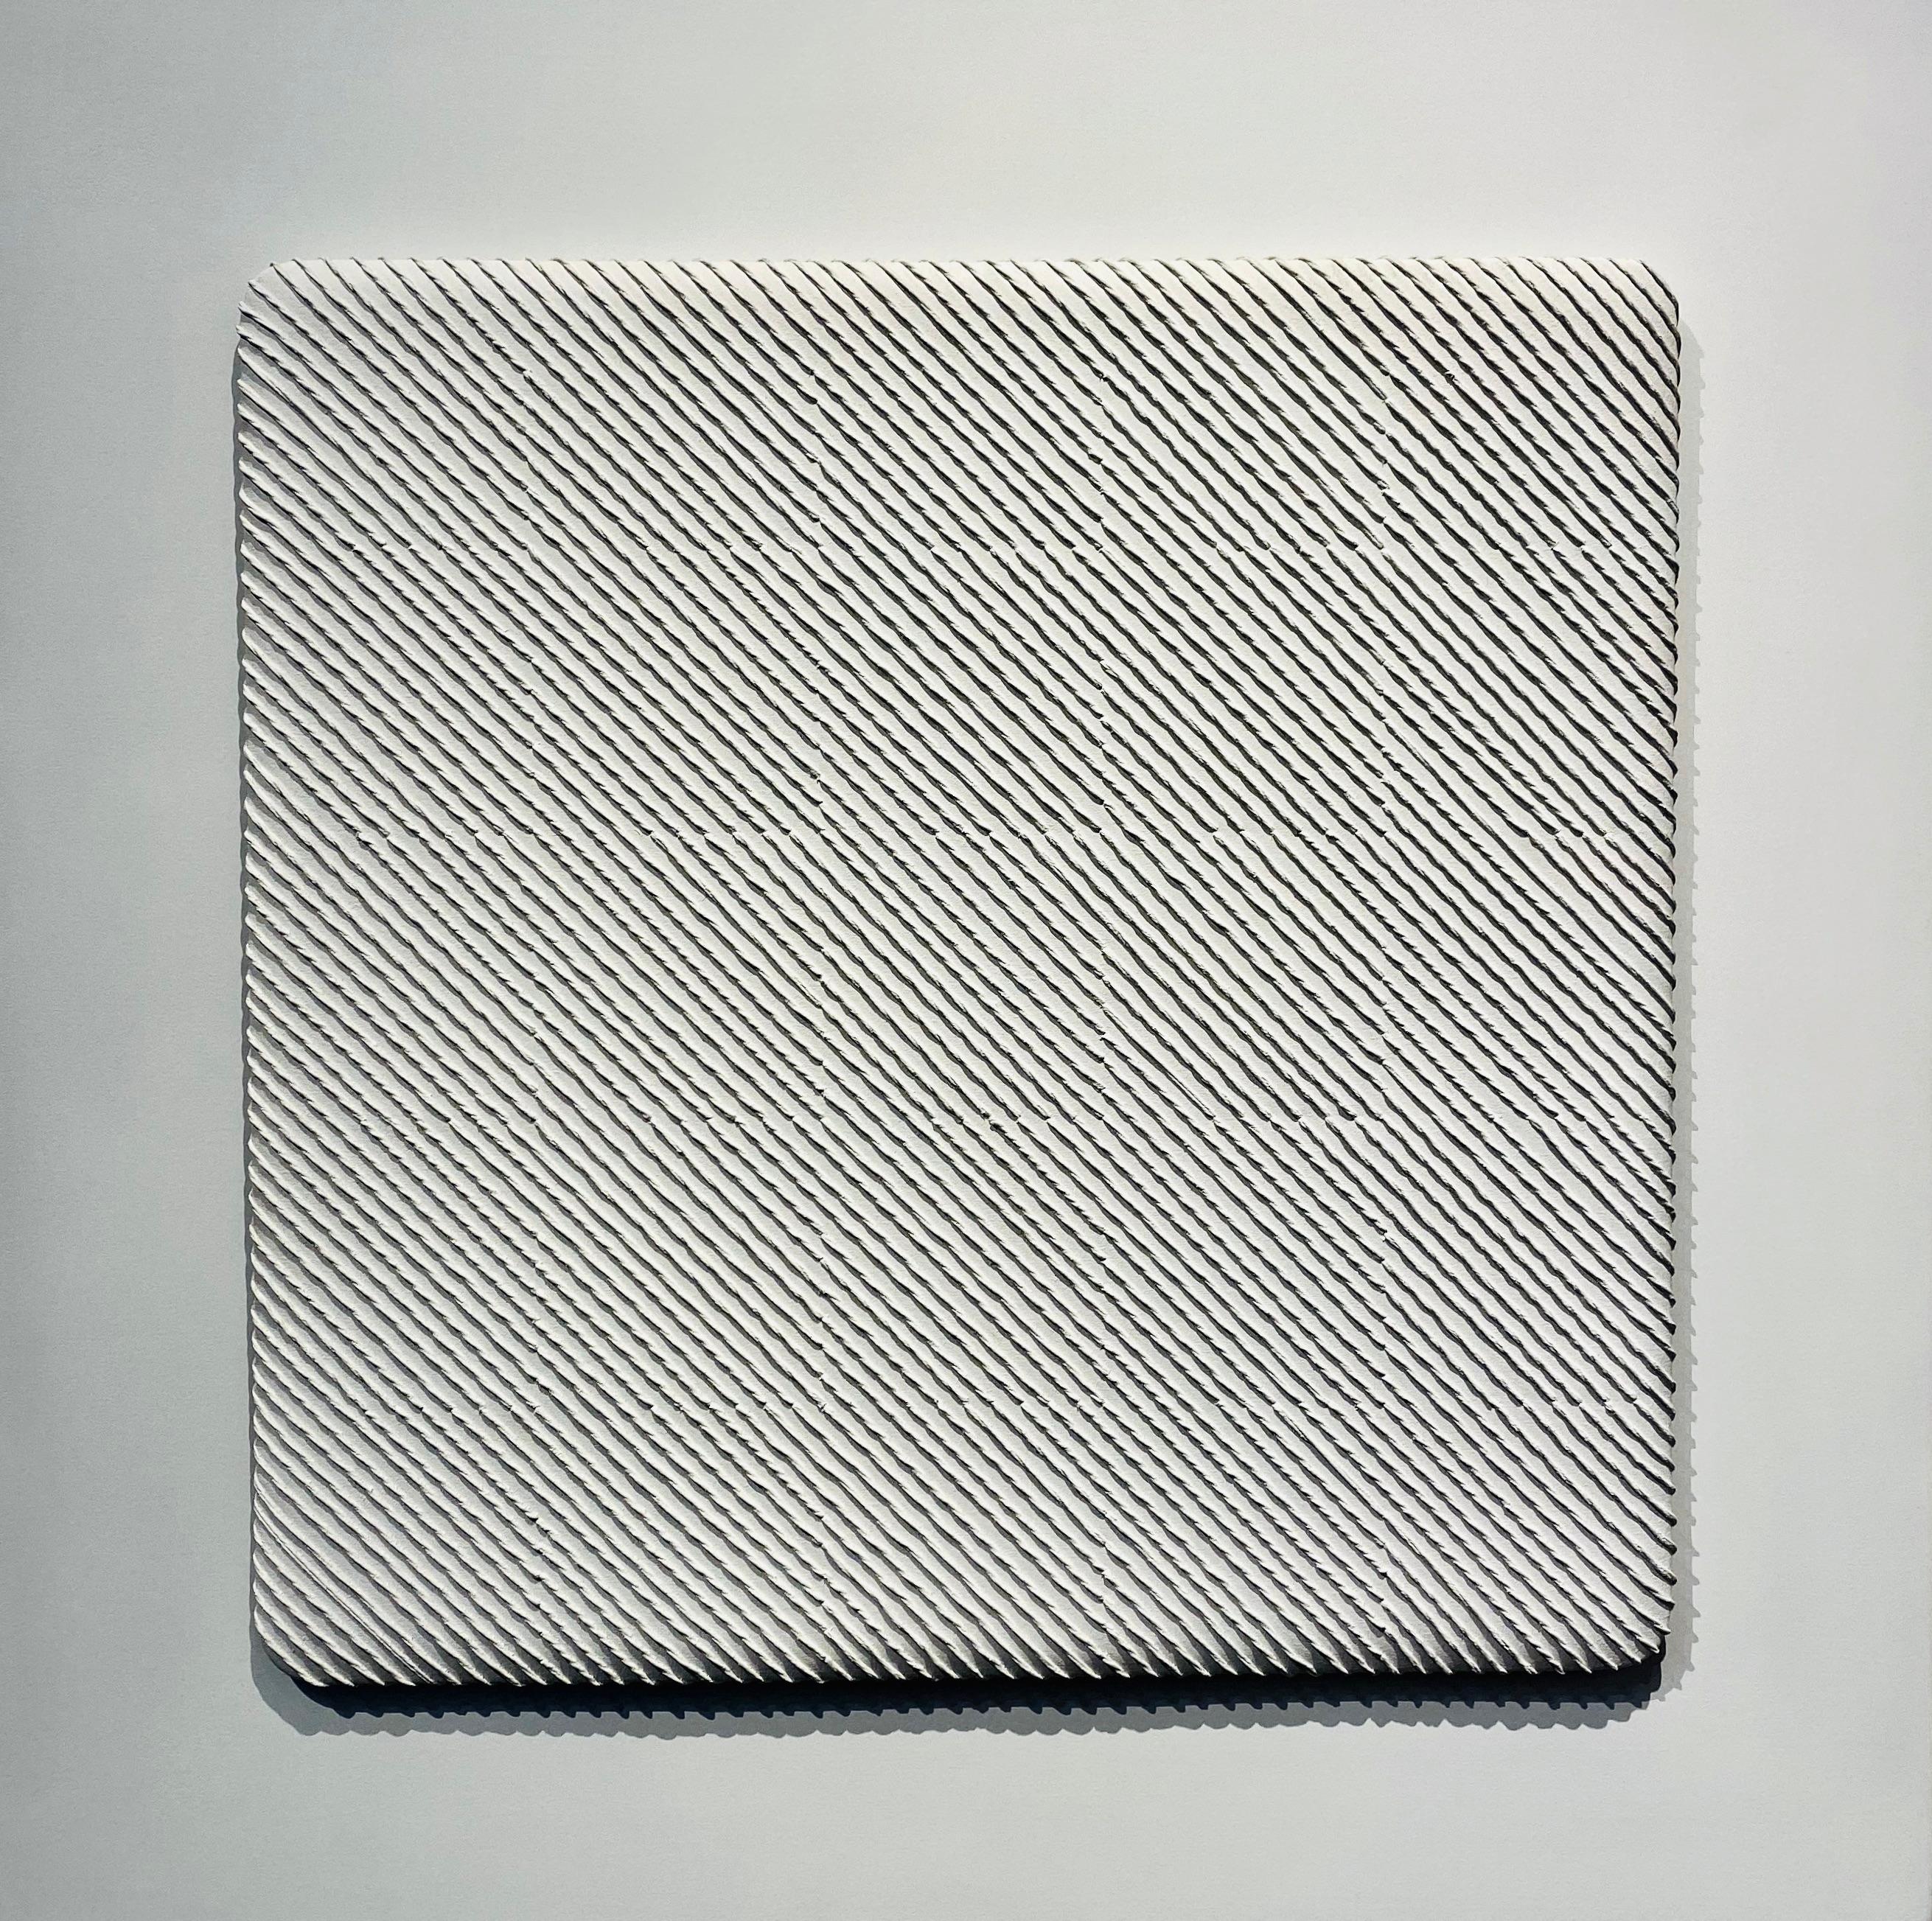 Walter Leblanc
Twisted String (TX180), 1971
cotten and white latex on canvas
60 x 60 cm  23 2/3 x 23 2/3 in
framed in acrylic box
signed and dated on verso.
Provenienz:
Fondation Walter & Nicole Leblanc, Brüssel
Exhibited:
Milan, Vismara, Walter